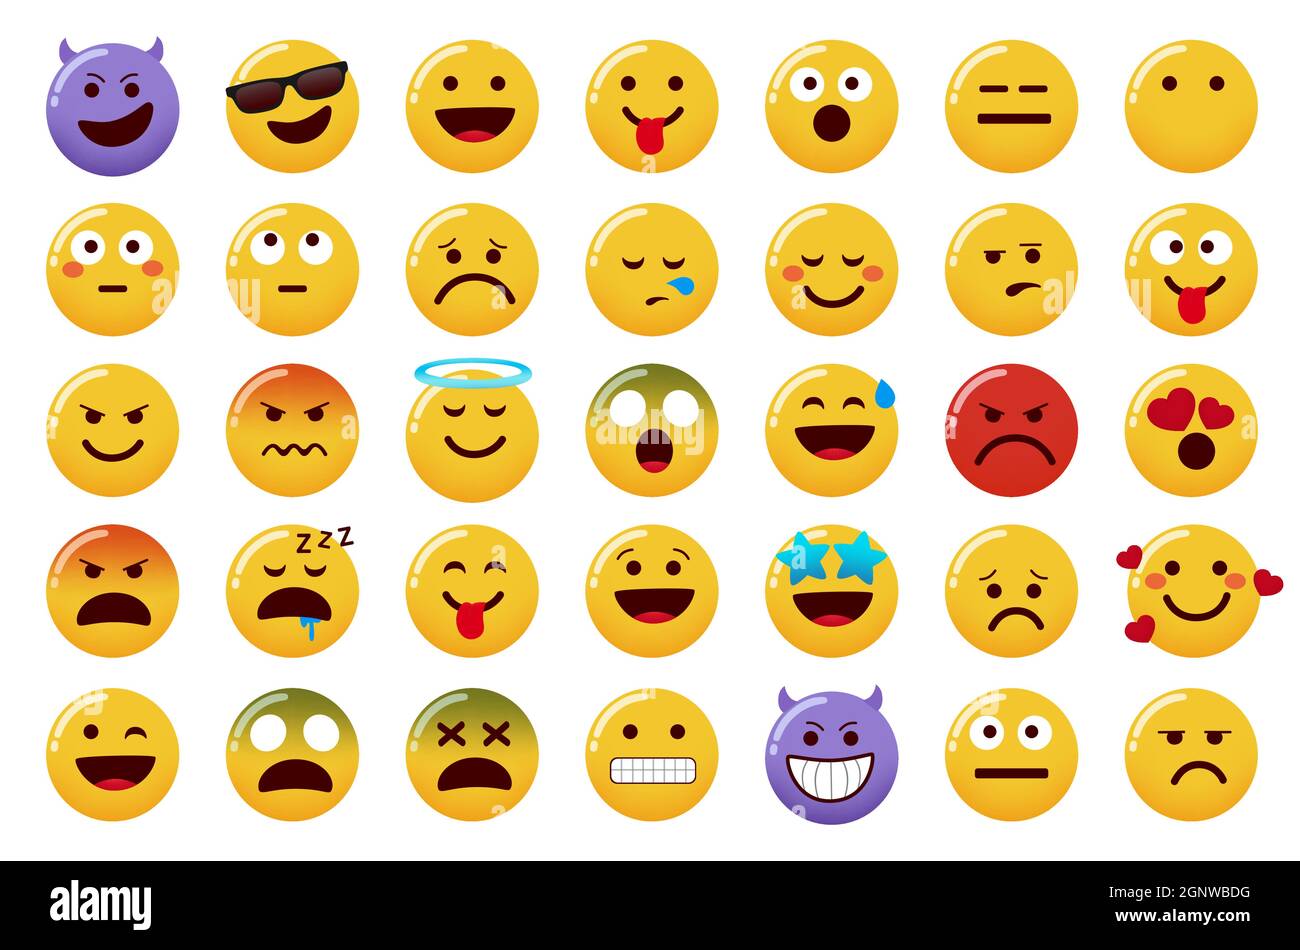 Emoticon smileys vector set. Emoticons character isolated in white background with smiling, evil, angry and sick facial expressions for smiley. Stock Vector